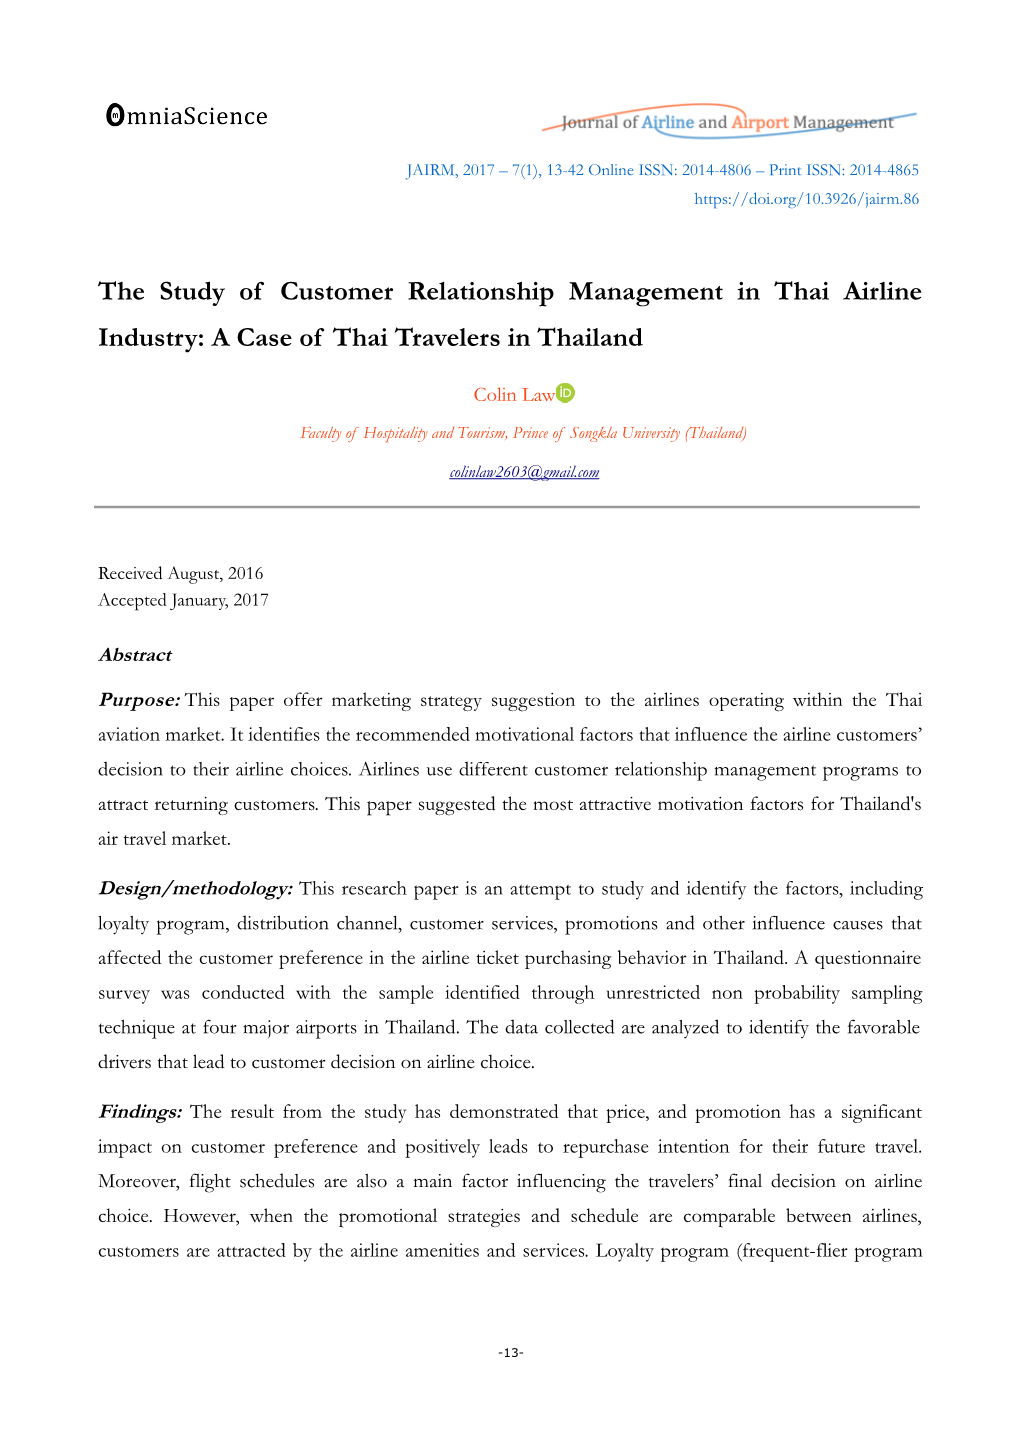 The Study of Customer Relationship Management in Thai Airline Industry: a Case of Thai Travelers in Thailand